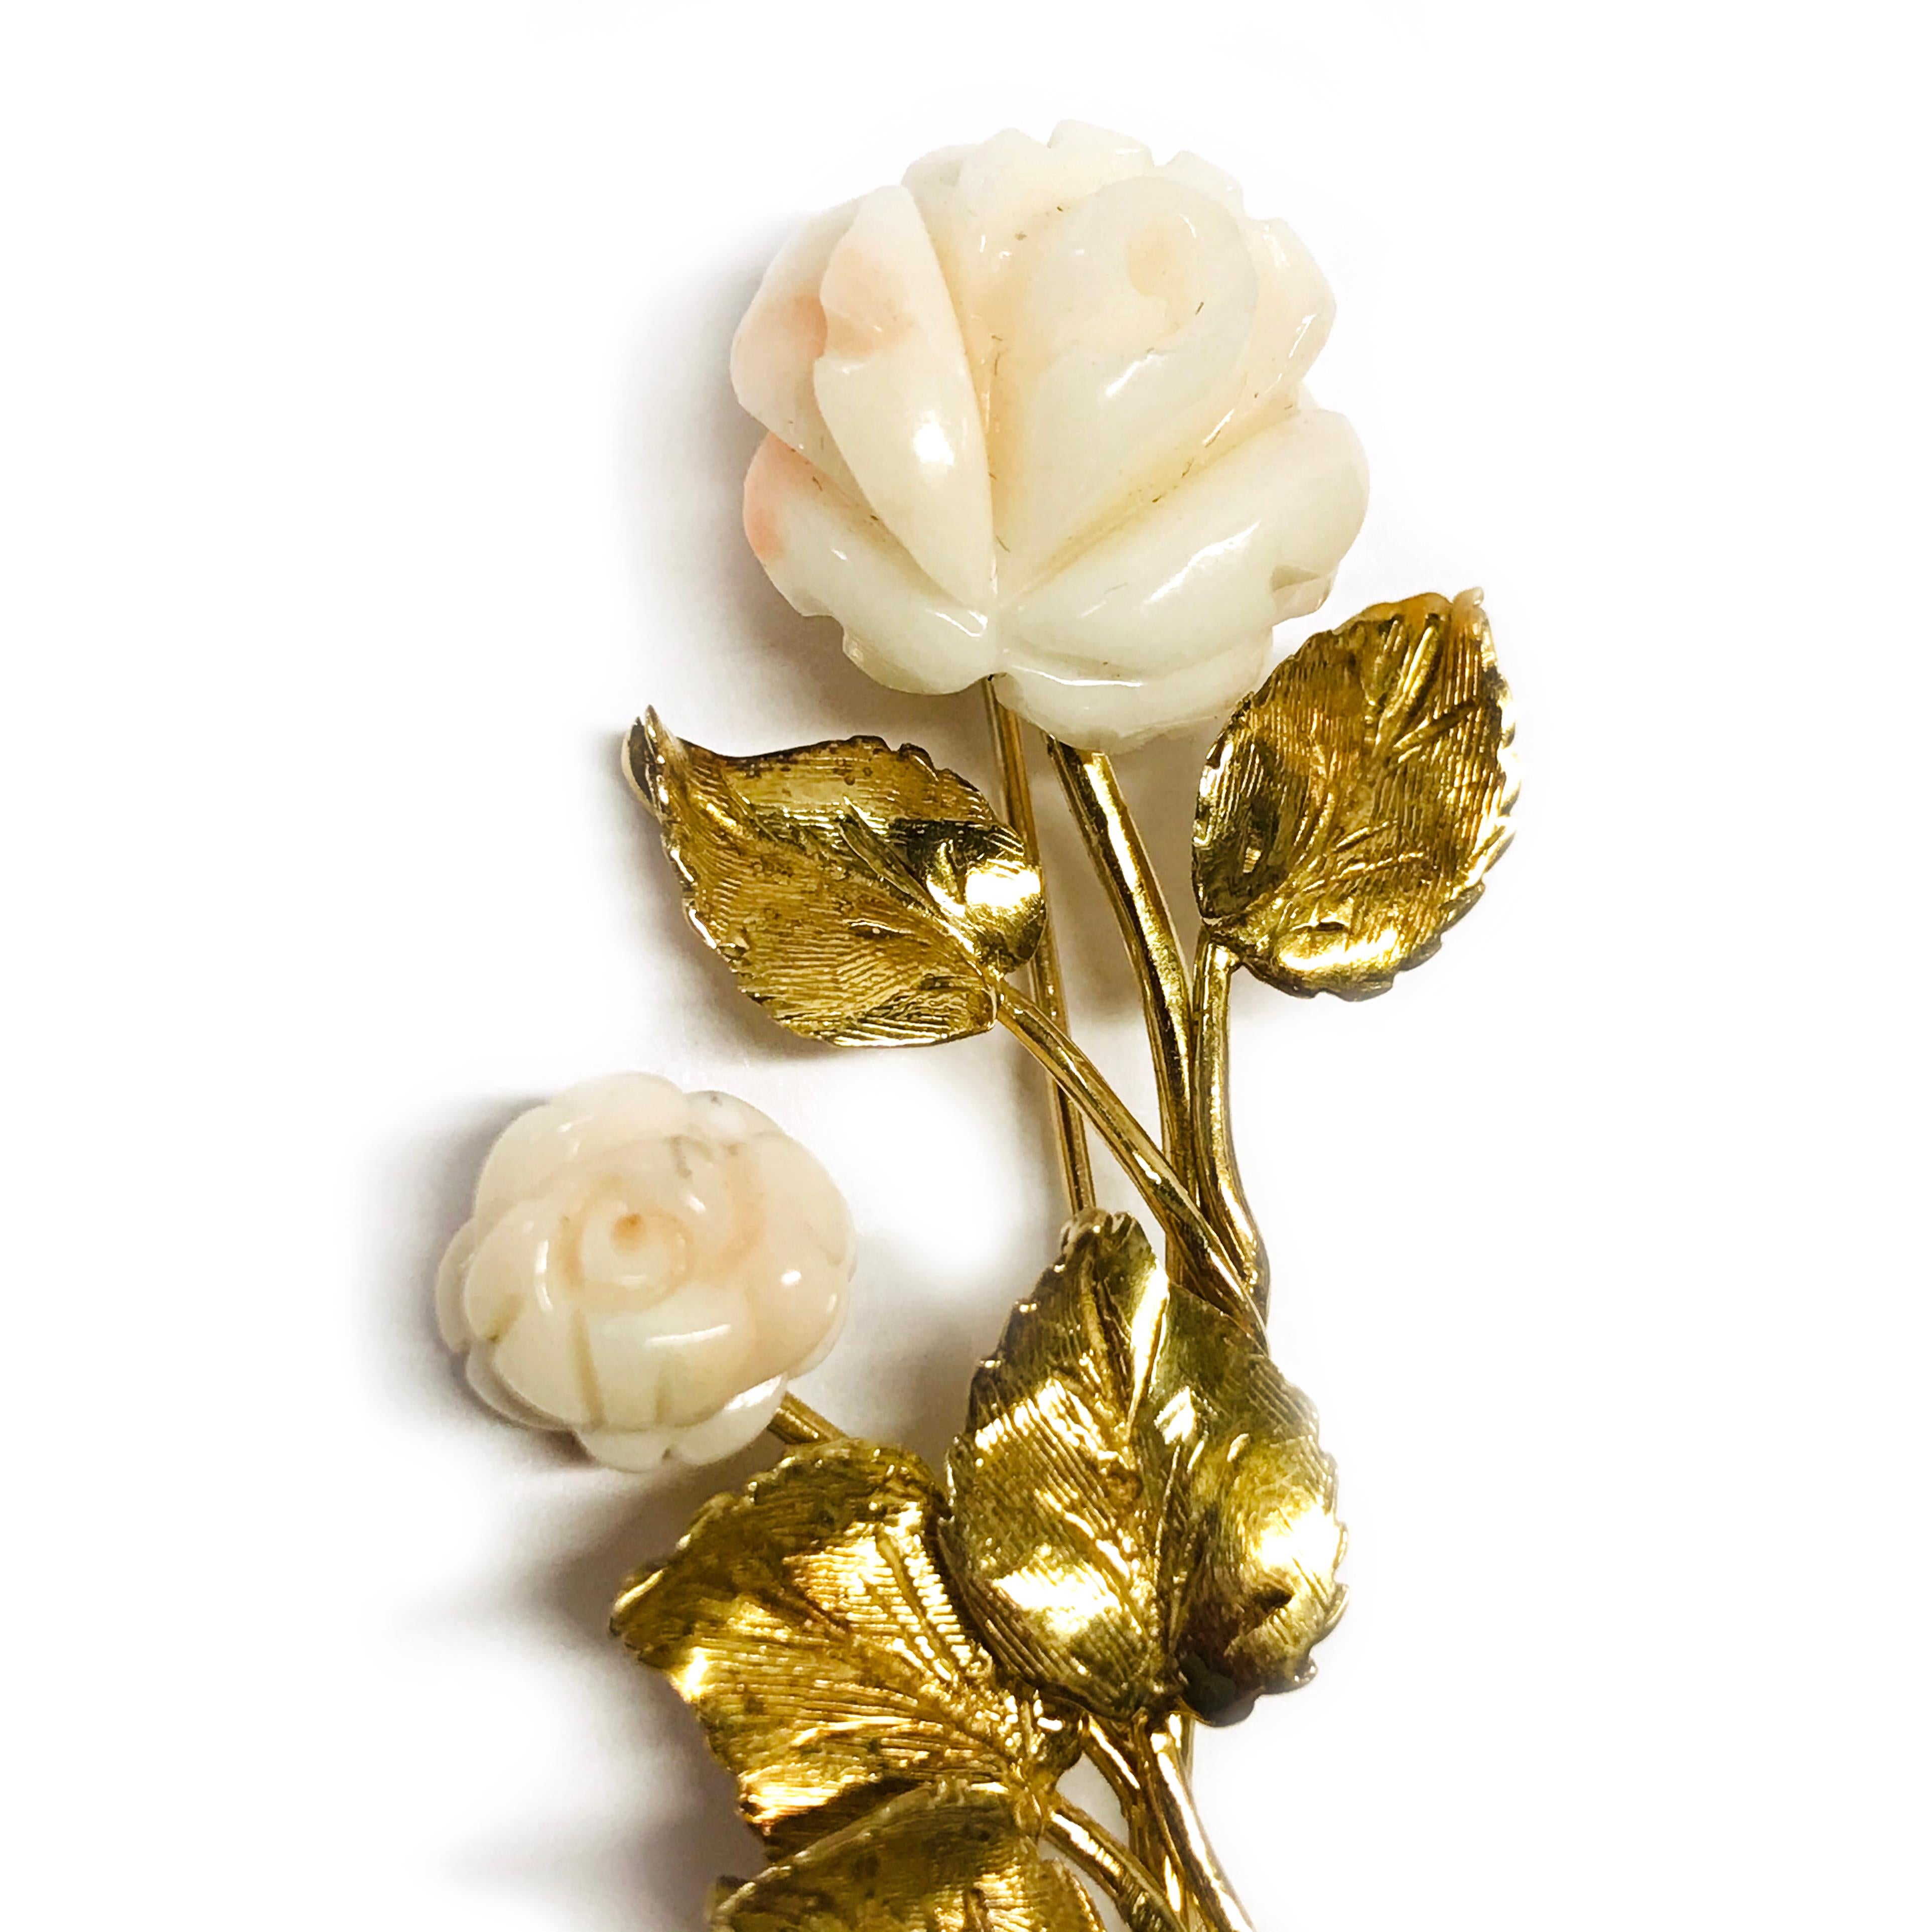 14 Karat Angel Skin Coral Flower Brooch. This brooch features two angel skin Coral flowers and five leaves with smooth and florentine finishes. The coral is mostly white with a whisper of orange-pink. The coral flowers are The brooch/pin has a gold